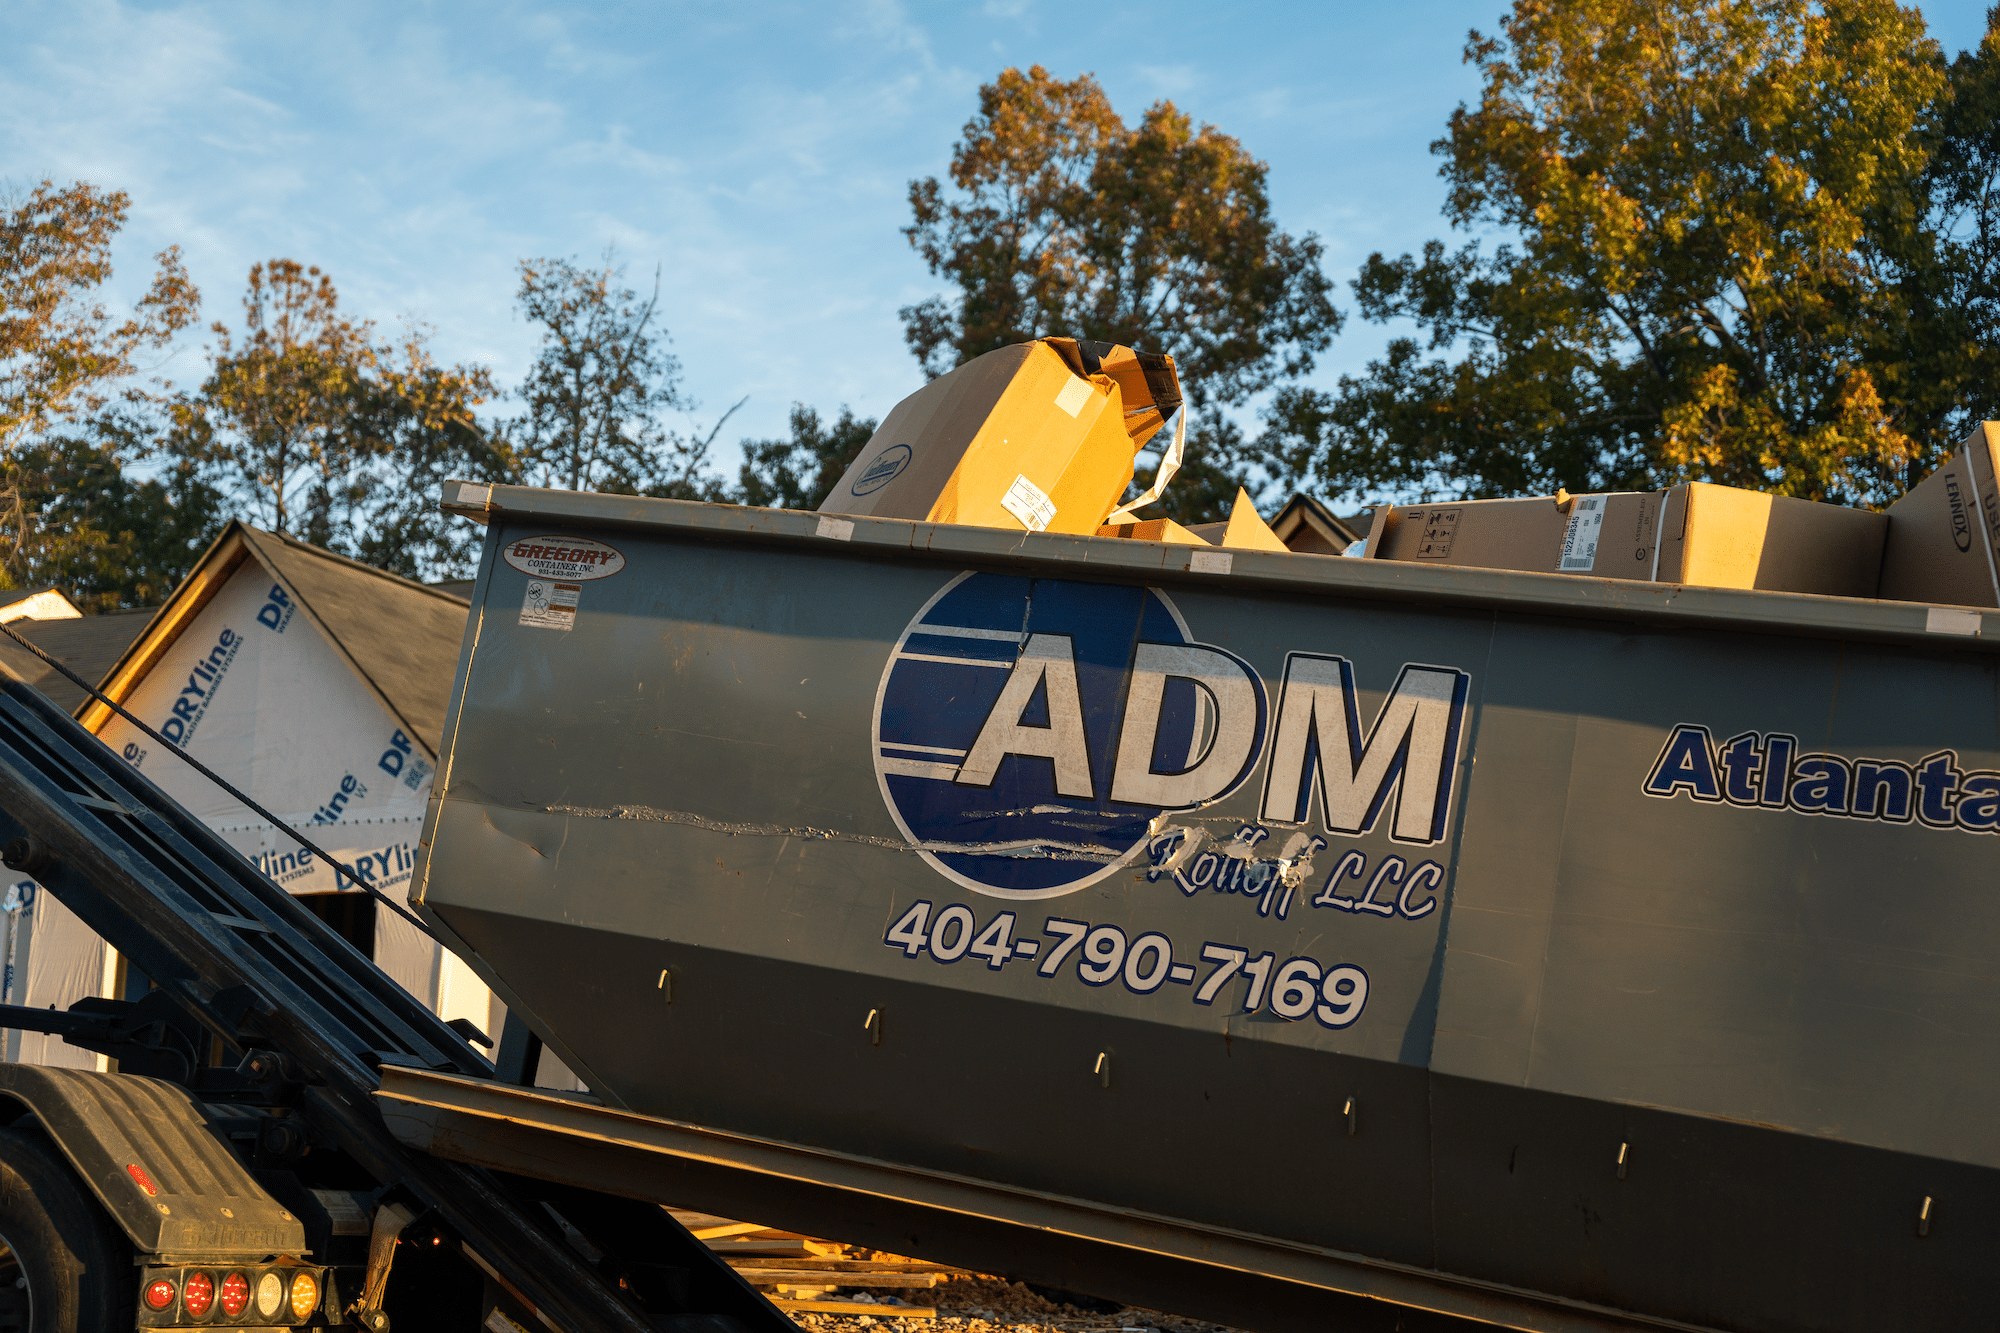 The Benefits of Using Dumpsters in Residential Construction